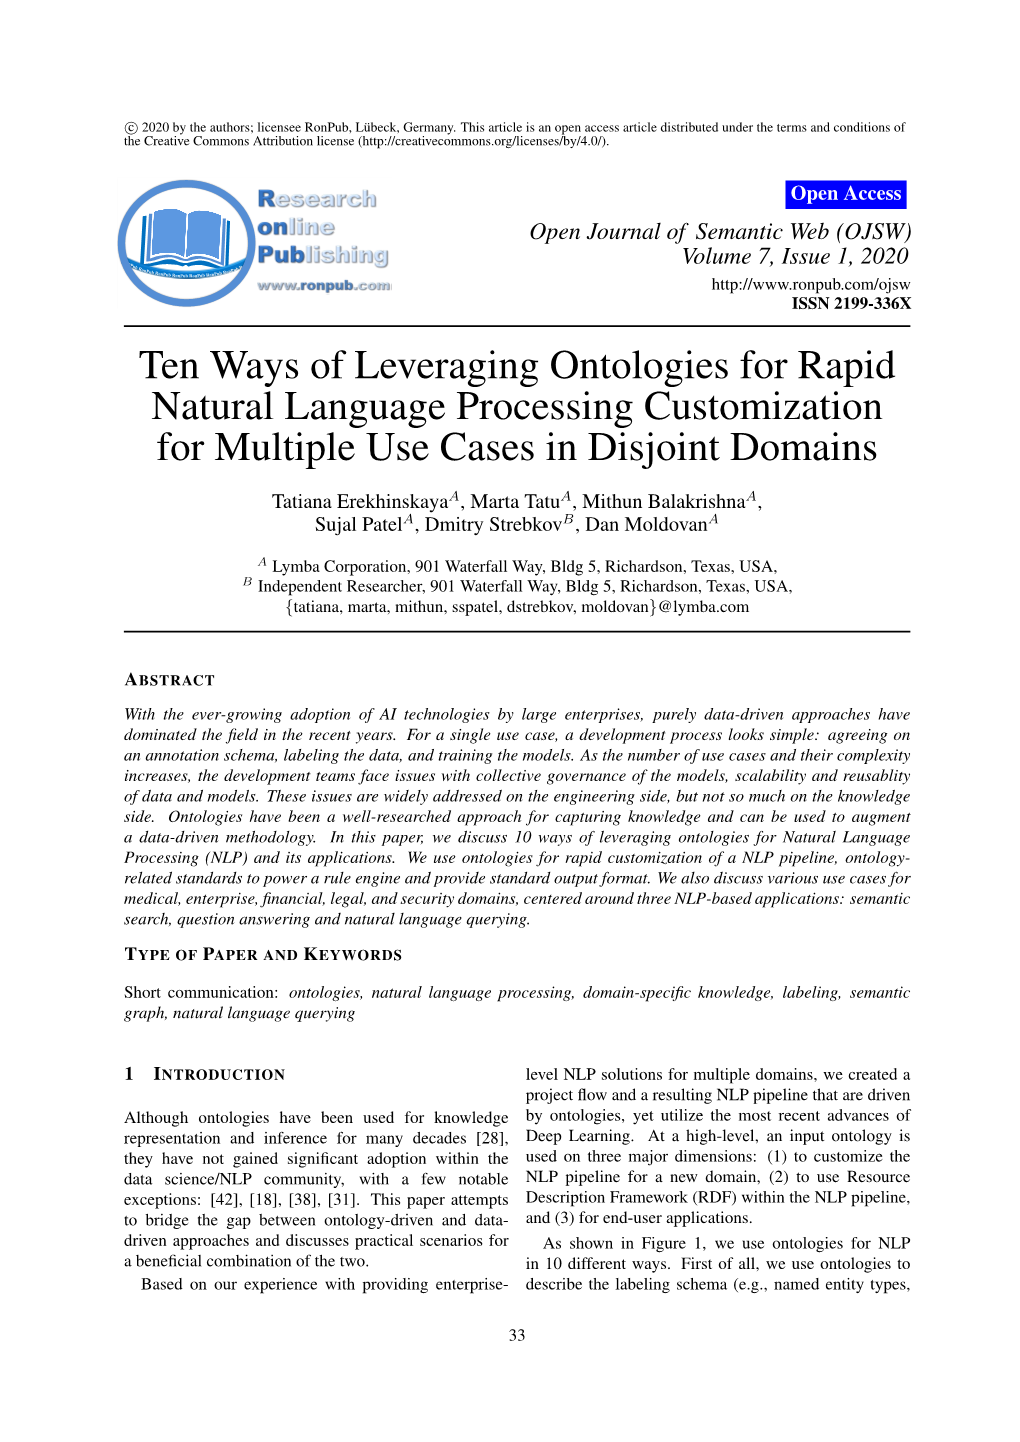 Ten Ways of Leveraging Ontologies for Rapid Natural Language Processing Customization for Multiple Use Cases in Disjoint Domains